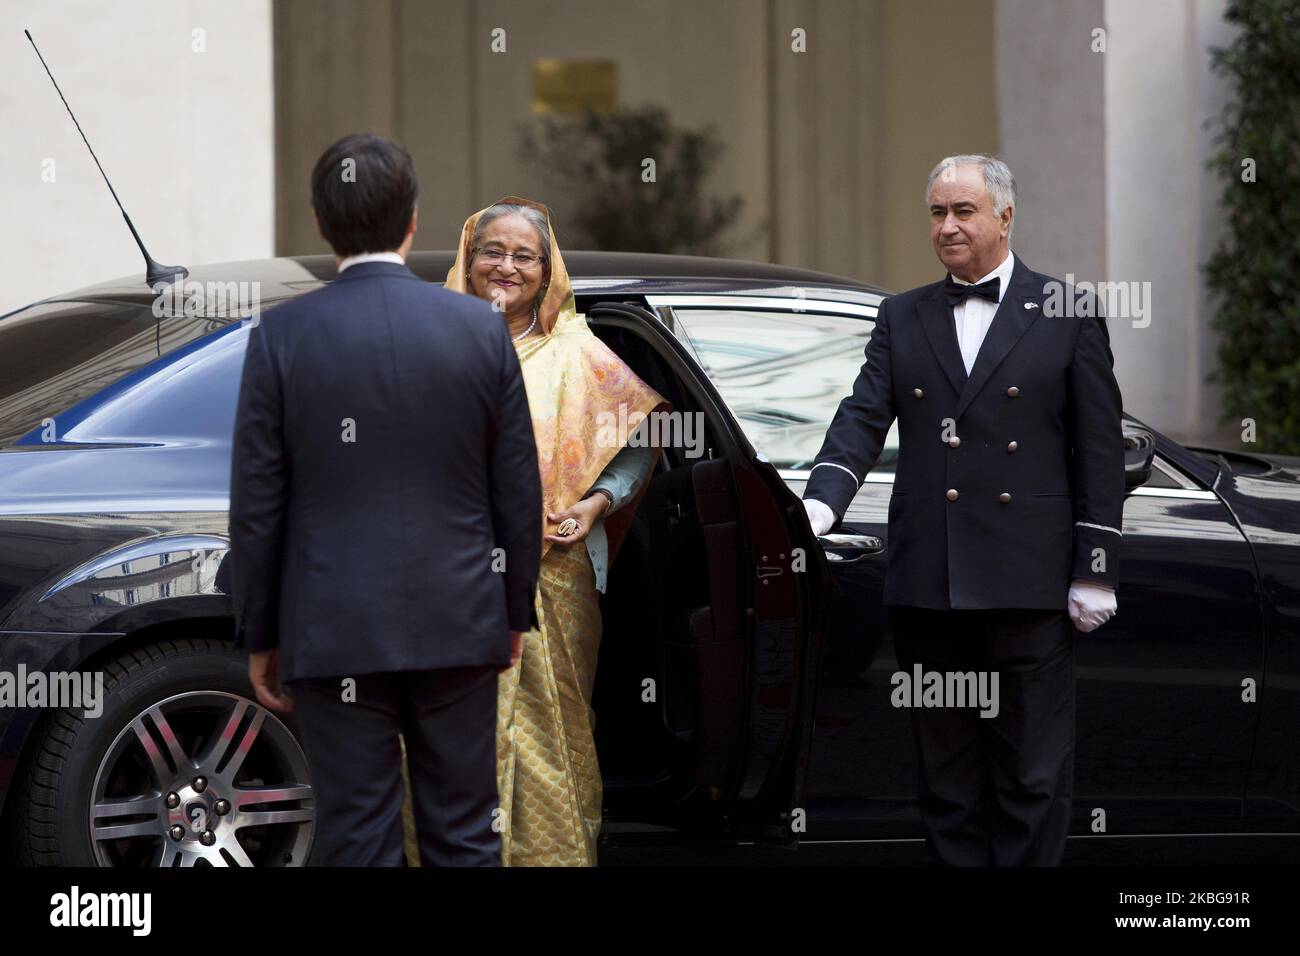 Italy's Prime Minister Giuseppe Conte greets Sheikh Hasina Prime Minister of Bangladesh at Chigi Palace in Rome, Italy on February 5, 2020. (Photo by Christian Minelli/NurPhoto) Stock Photo